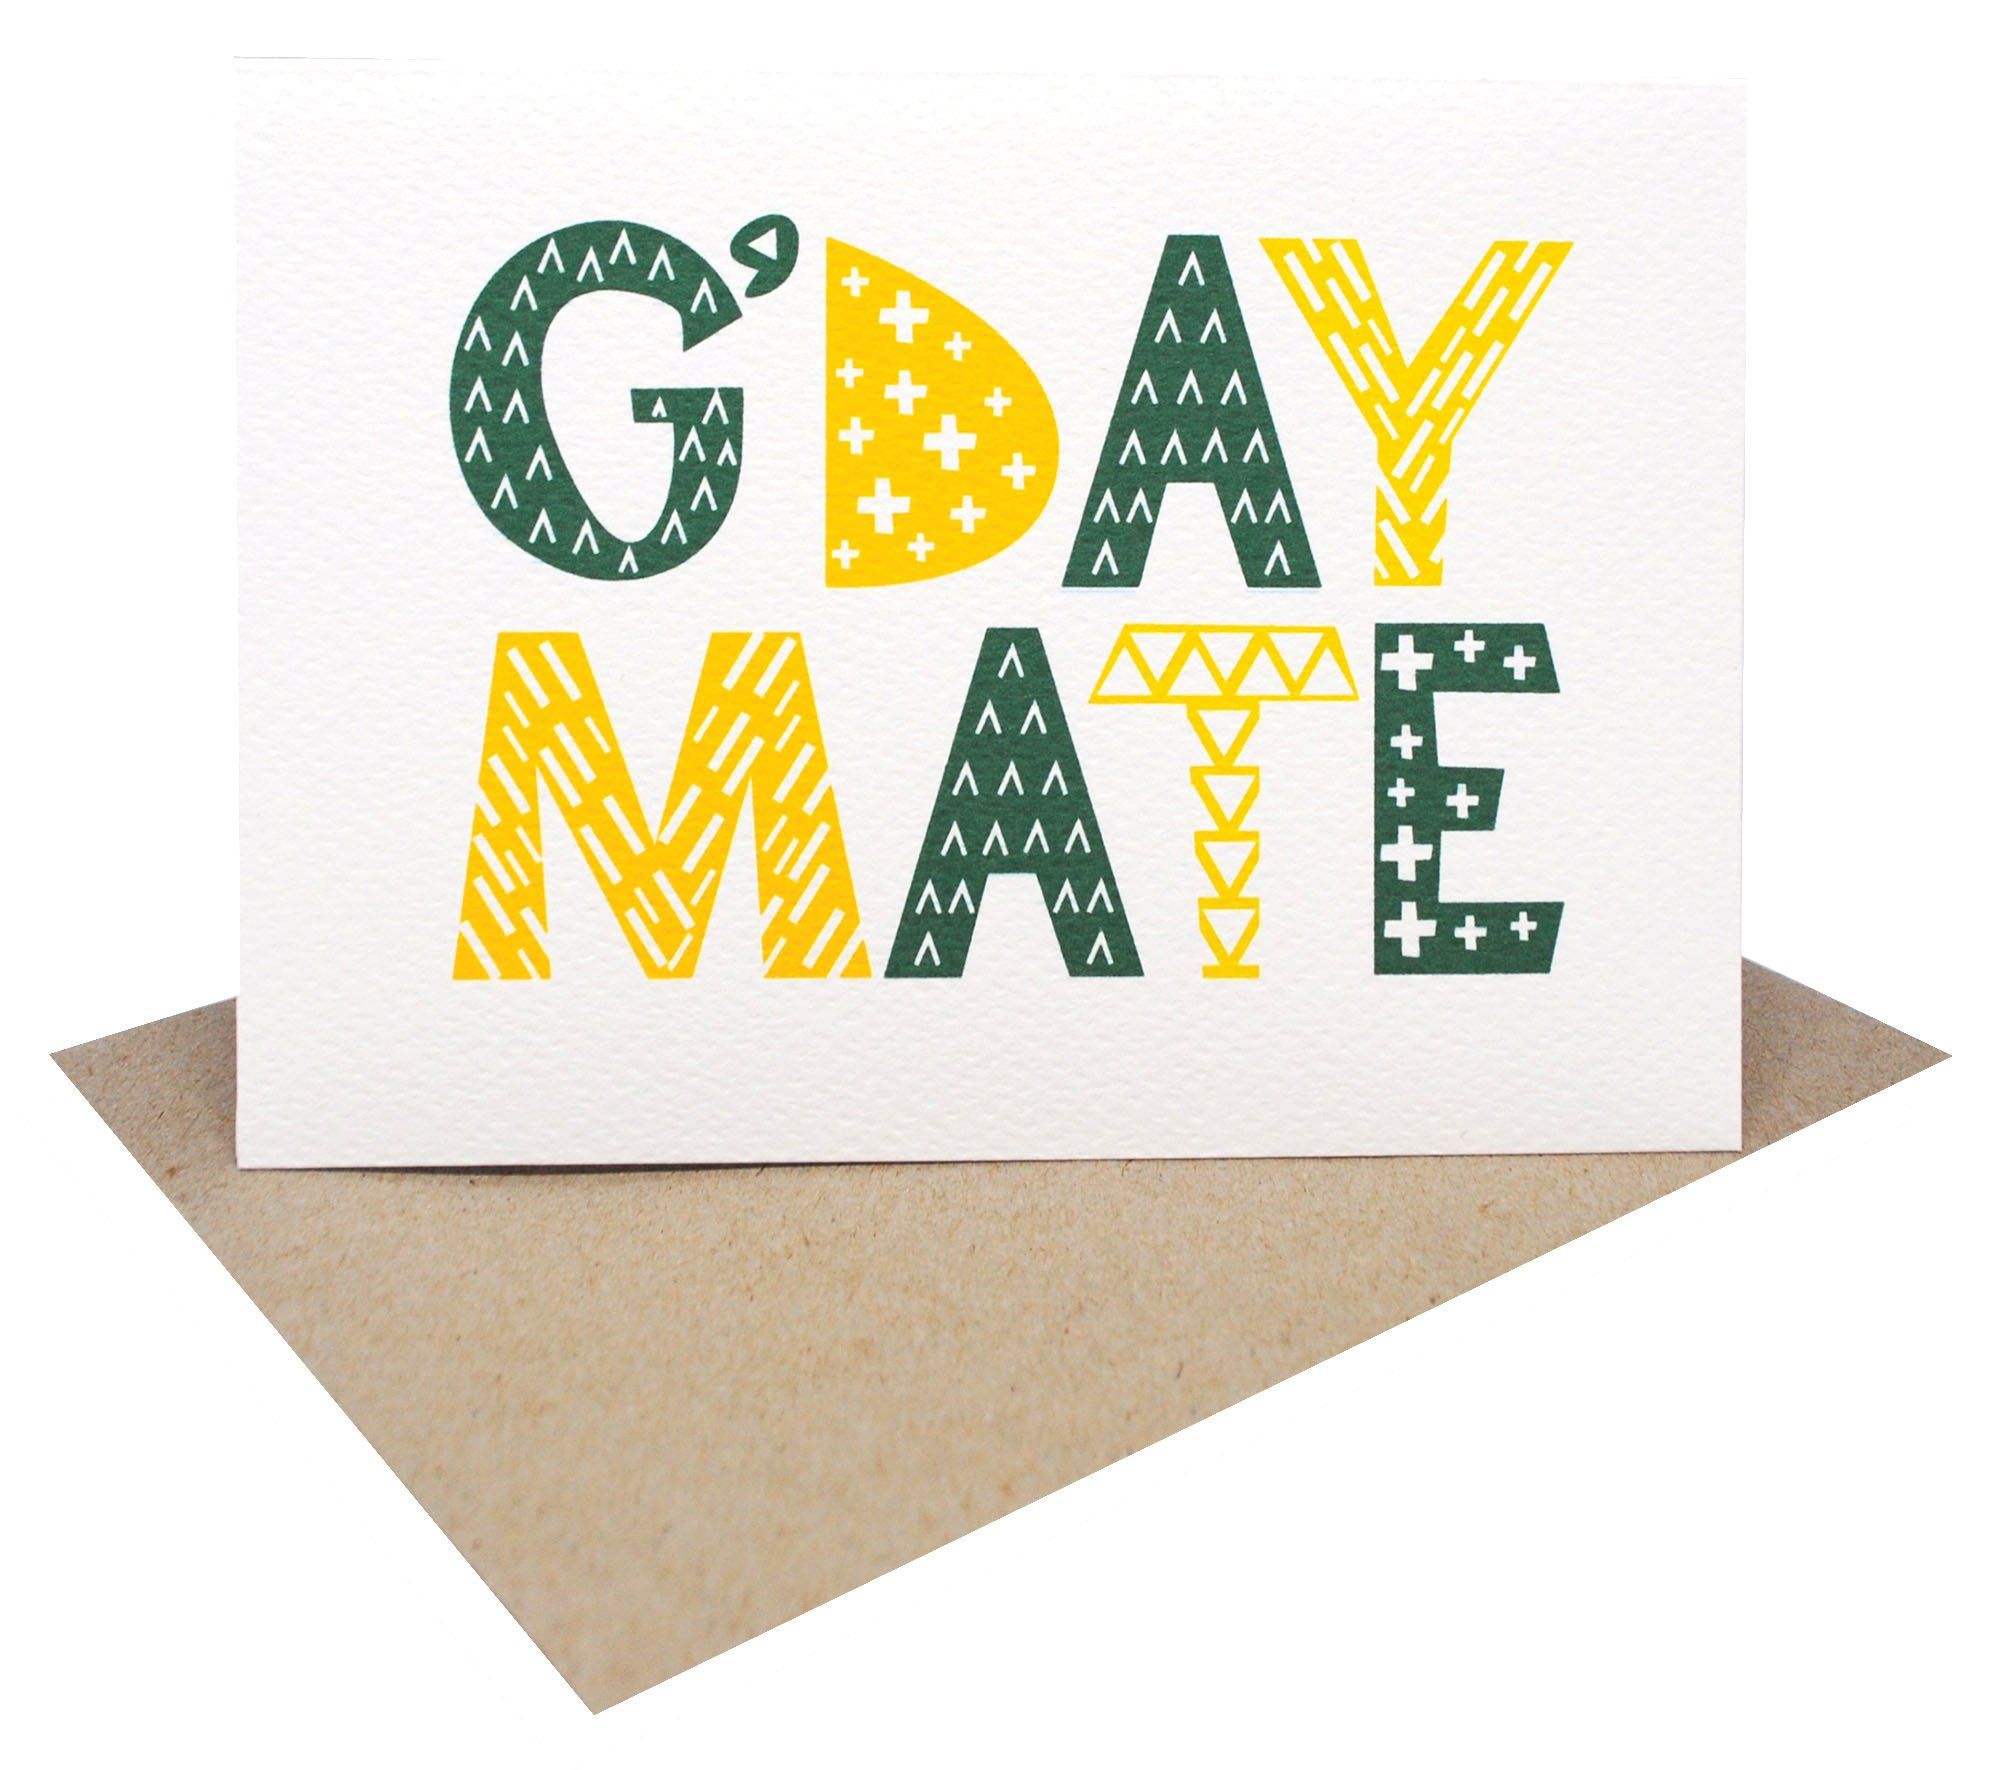 G'day mate | Handmade design and Patterns